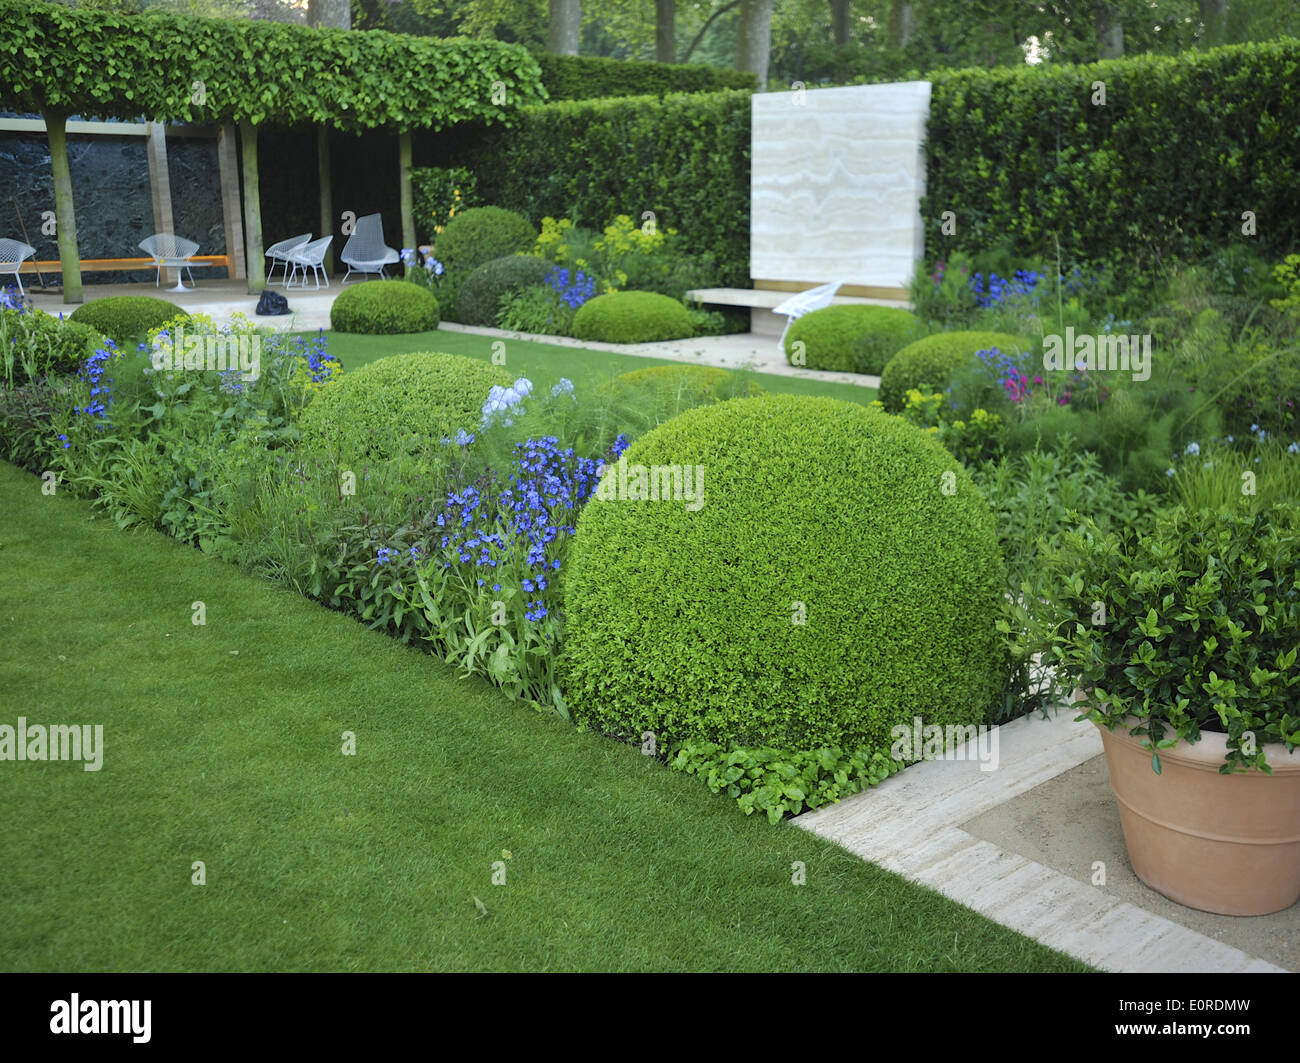 Chelsea, London, UK. 19th May 2014. The Telegraph Garden (designed by Tommaso del Buono and Paul Gazerwitz) at the Chelsea Flower Show. Credit:  Michael Preston/Alamy Live News Stock Photo